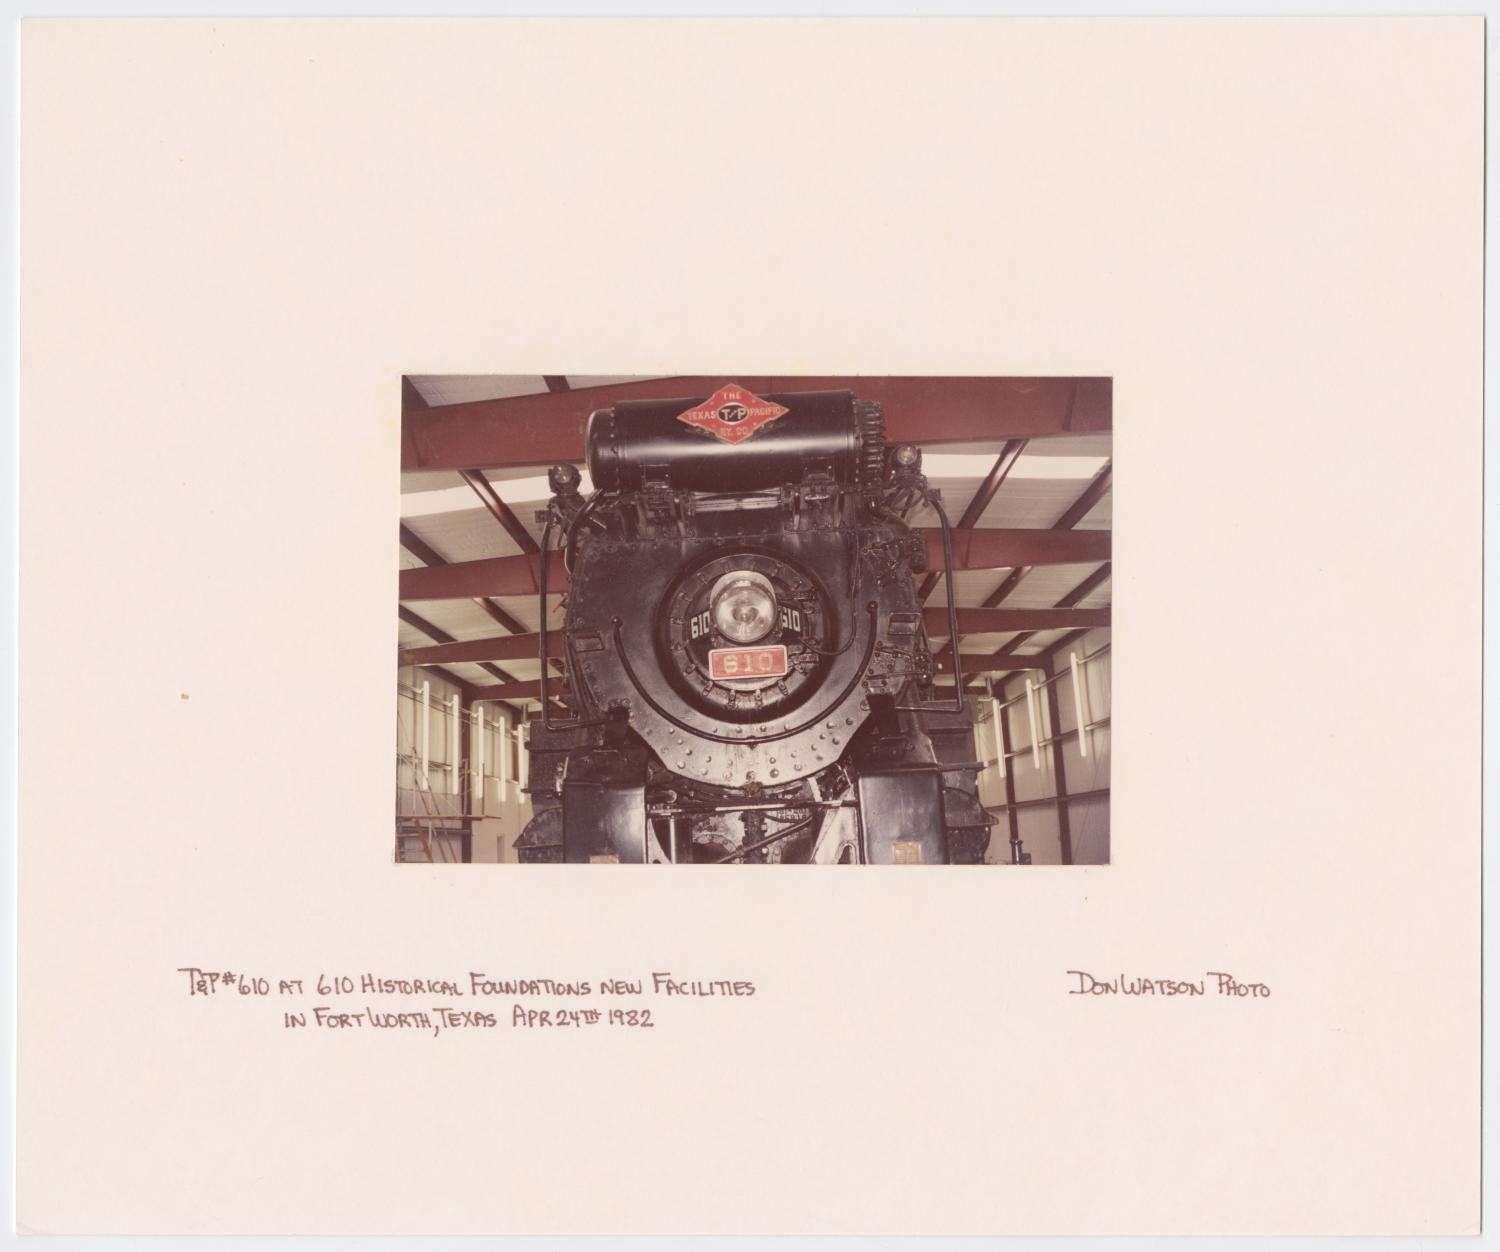 [Front of Train #610 Engine]
                                                
                                                    [Sequence #]: 1 of 2
                                                